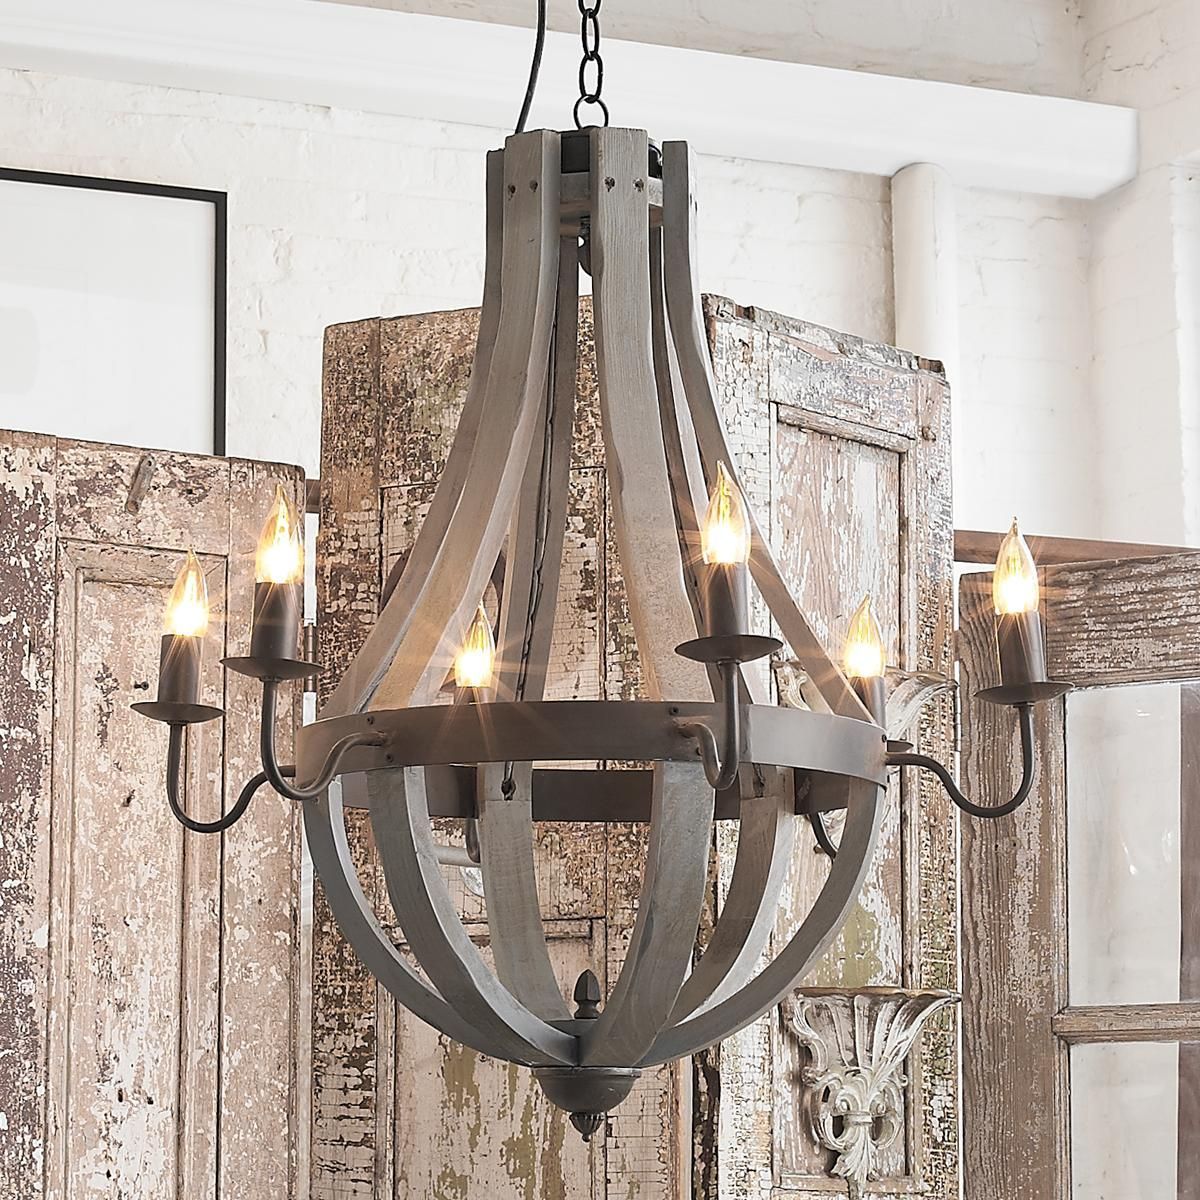 Wooden Wine Barrel Stave Chandelier | Wine Barrel With Regard To French Washed Oak And Distressed White Wood Six Light Chandeliers (View 11 of 15)